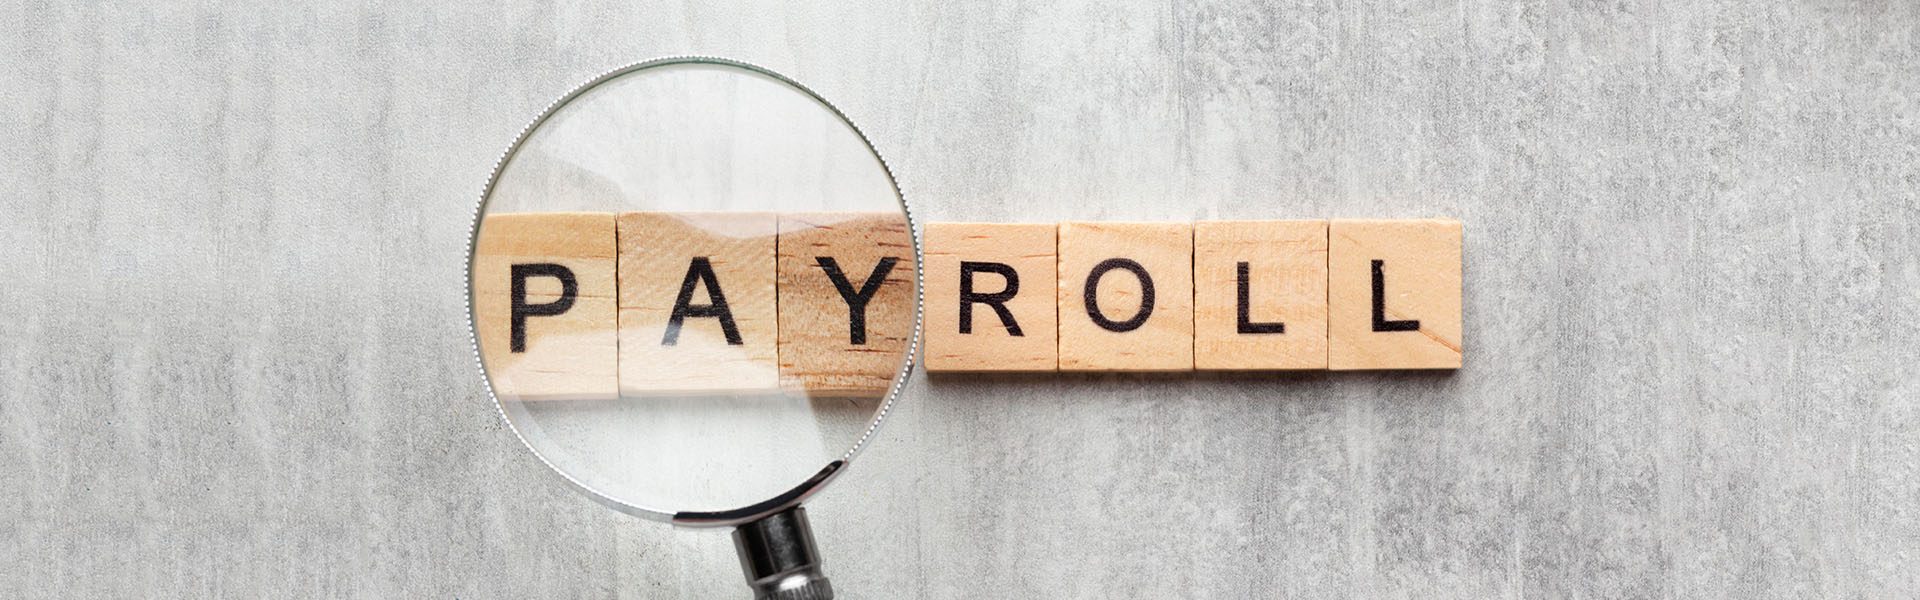 payroll services melbourne